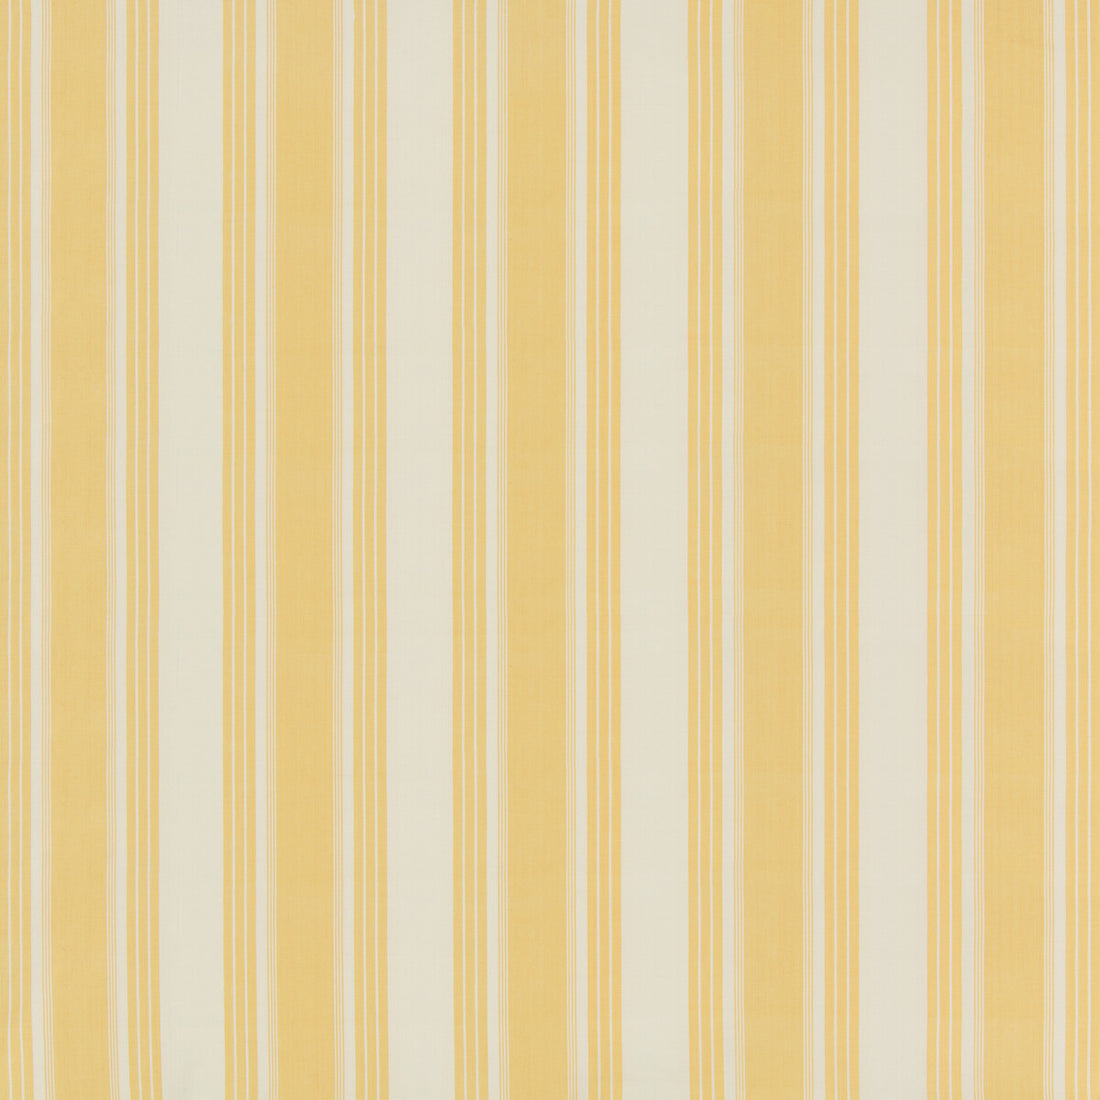 Colmar Stripe fabric in yellow color - pattern 8019110.40.0 - by Brunschwig &amp; Fils in the Folio Francais collection